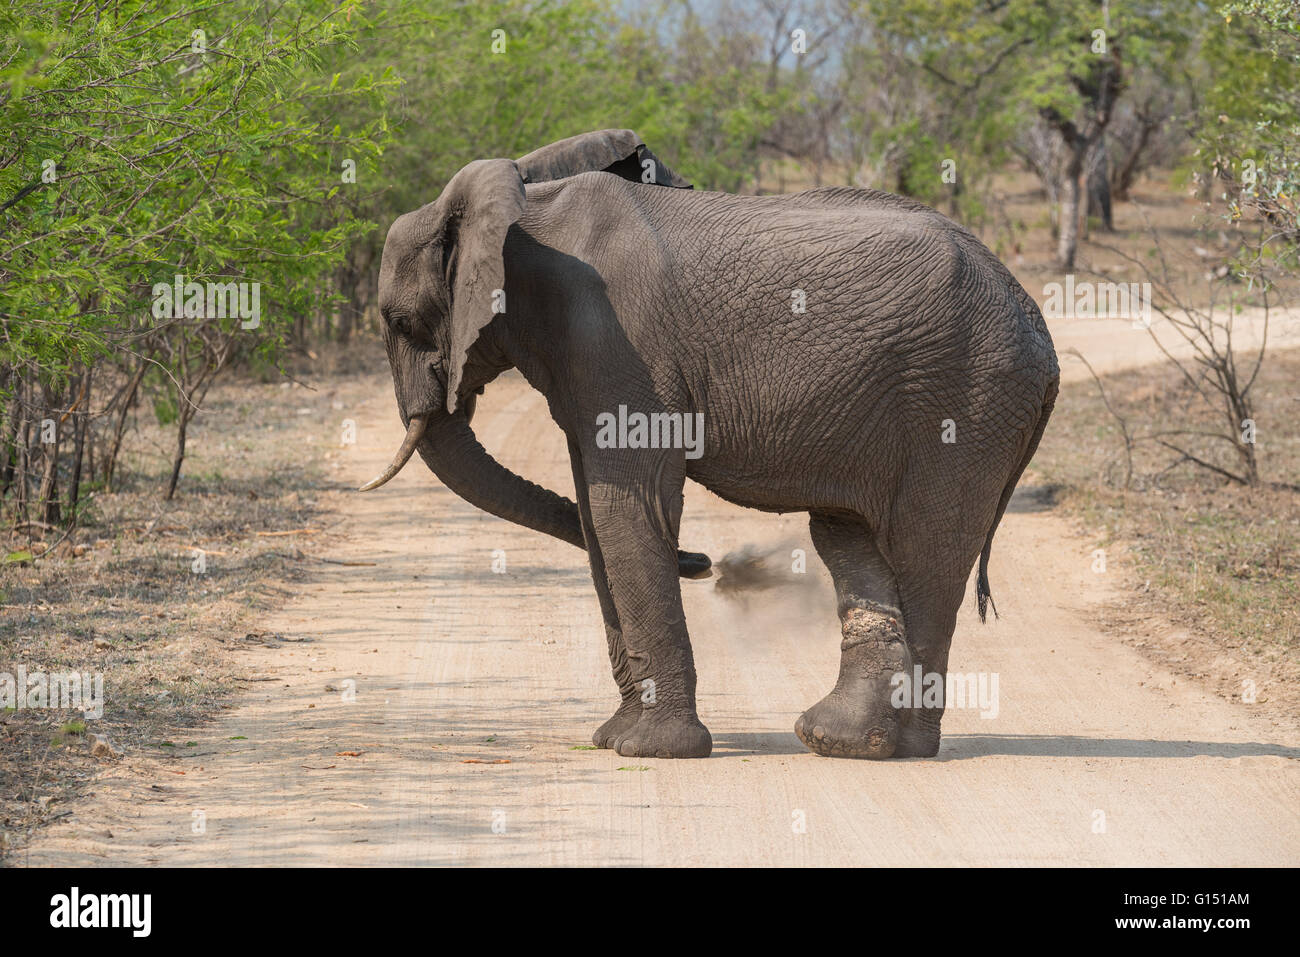 An elephant blowing sand onto a snare wound on one of his legs Stock Photo